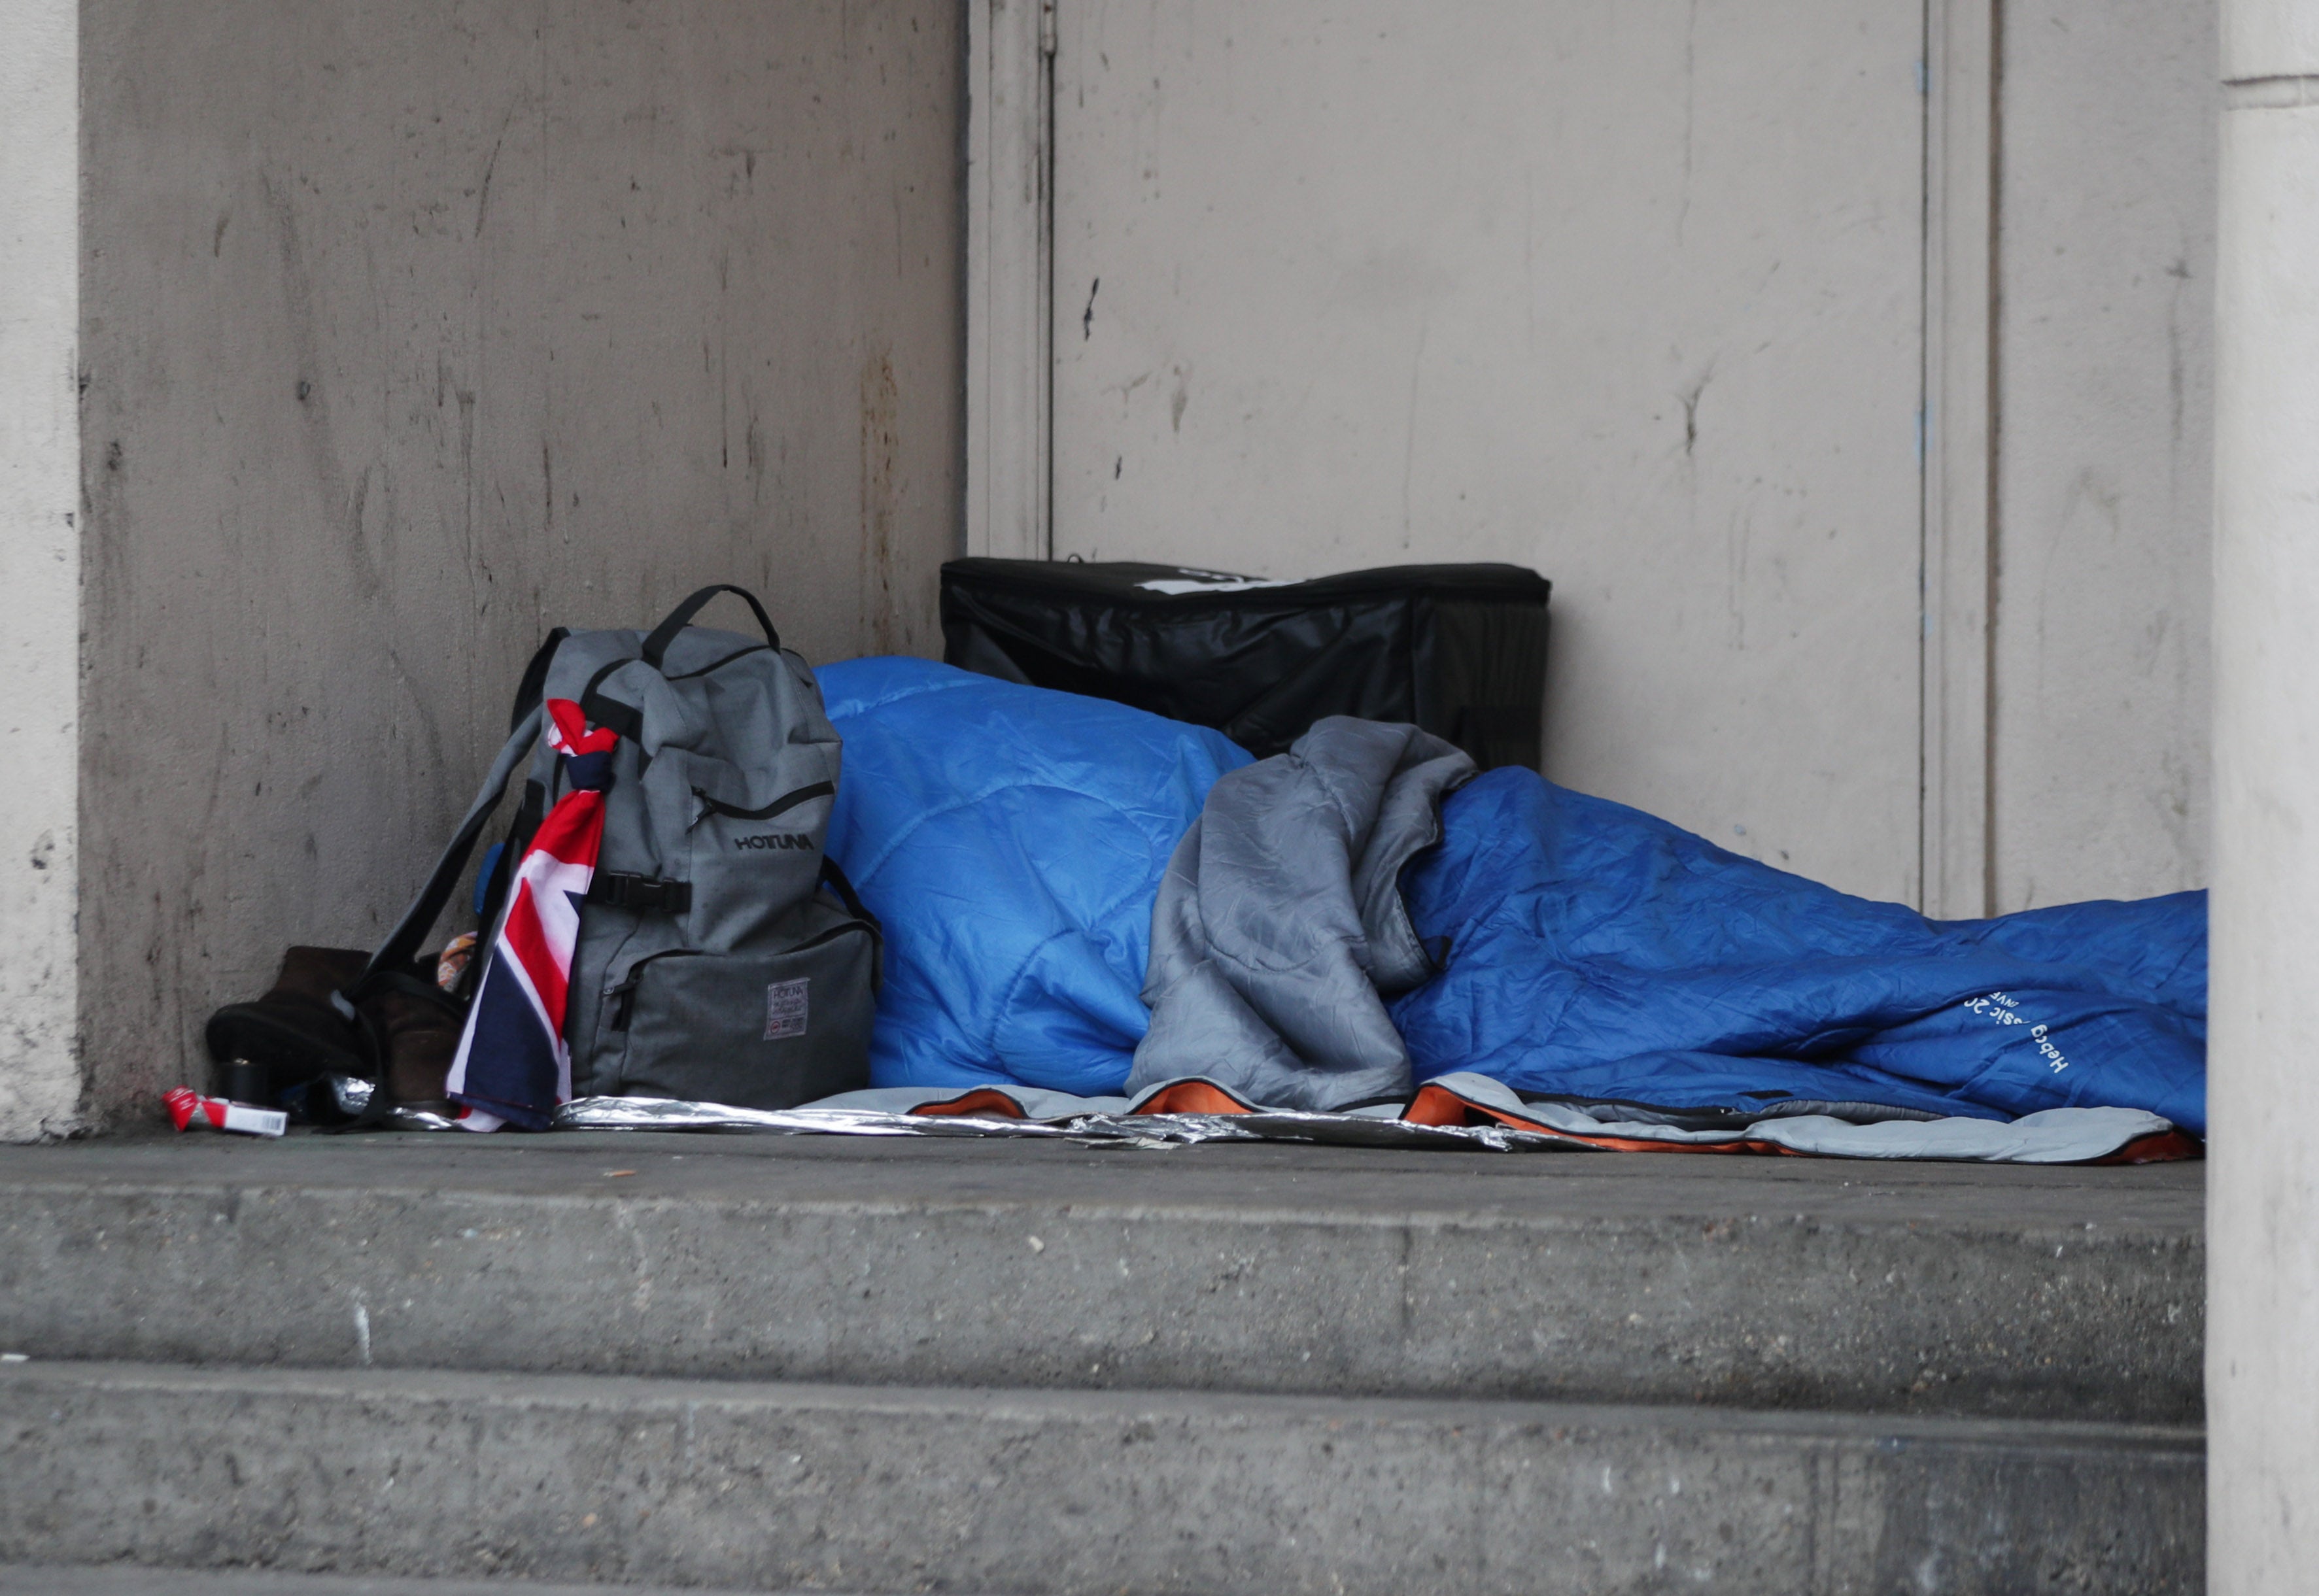 Criminal Justice Bill will ‘breaks people’蝉 spirits’, support worker who slept rough says